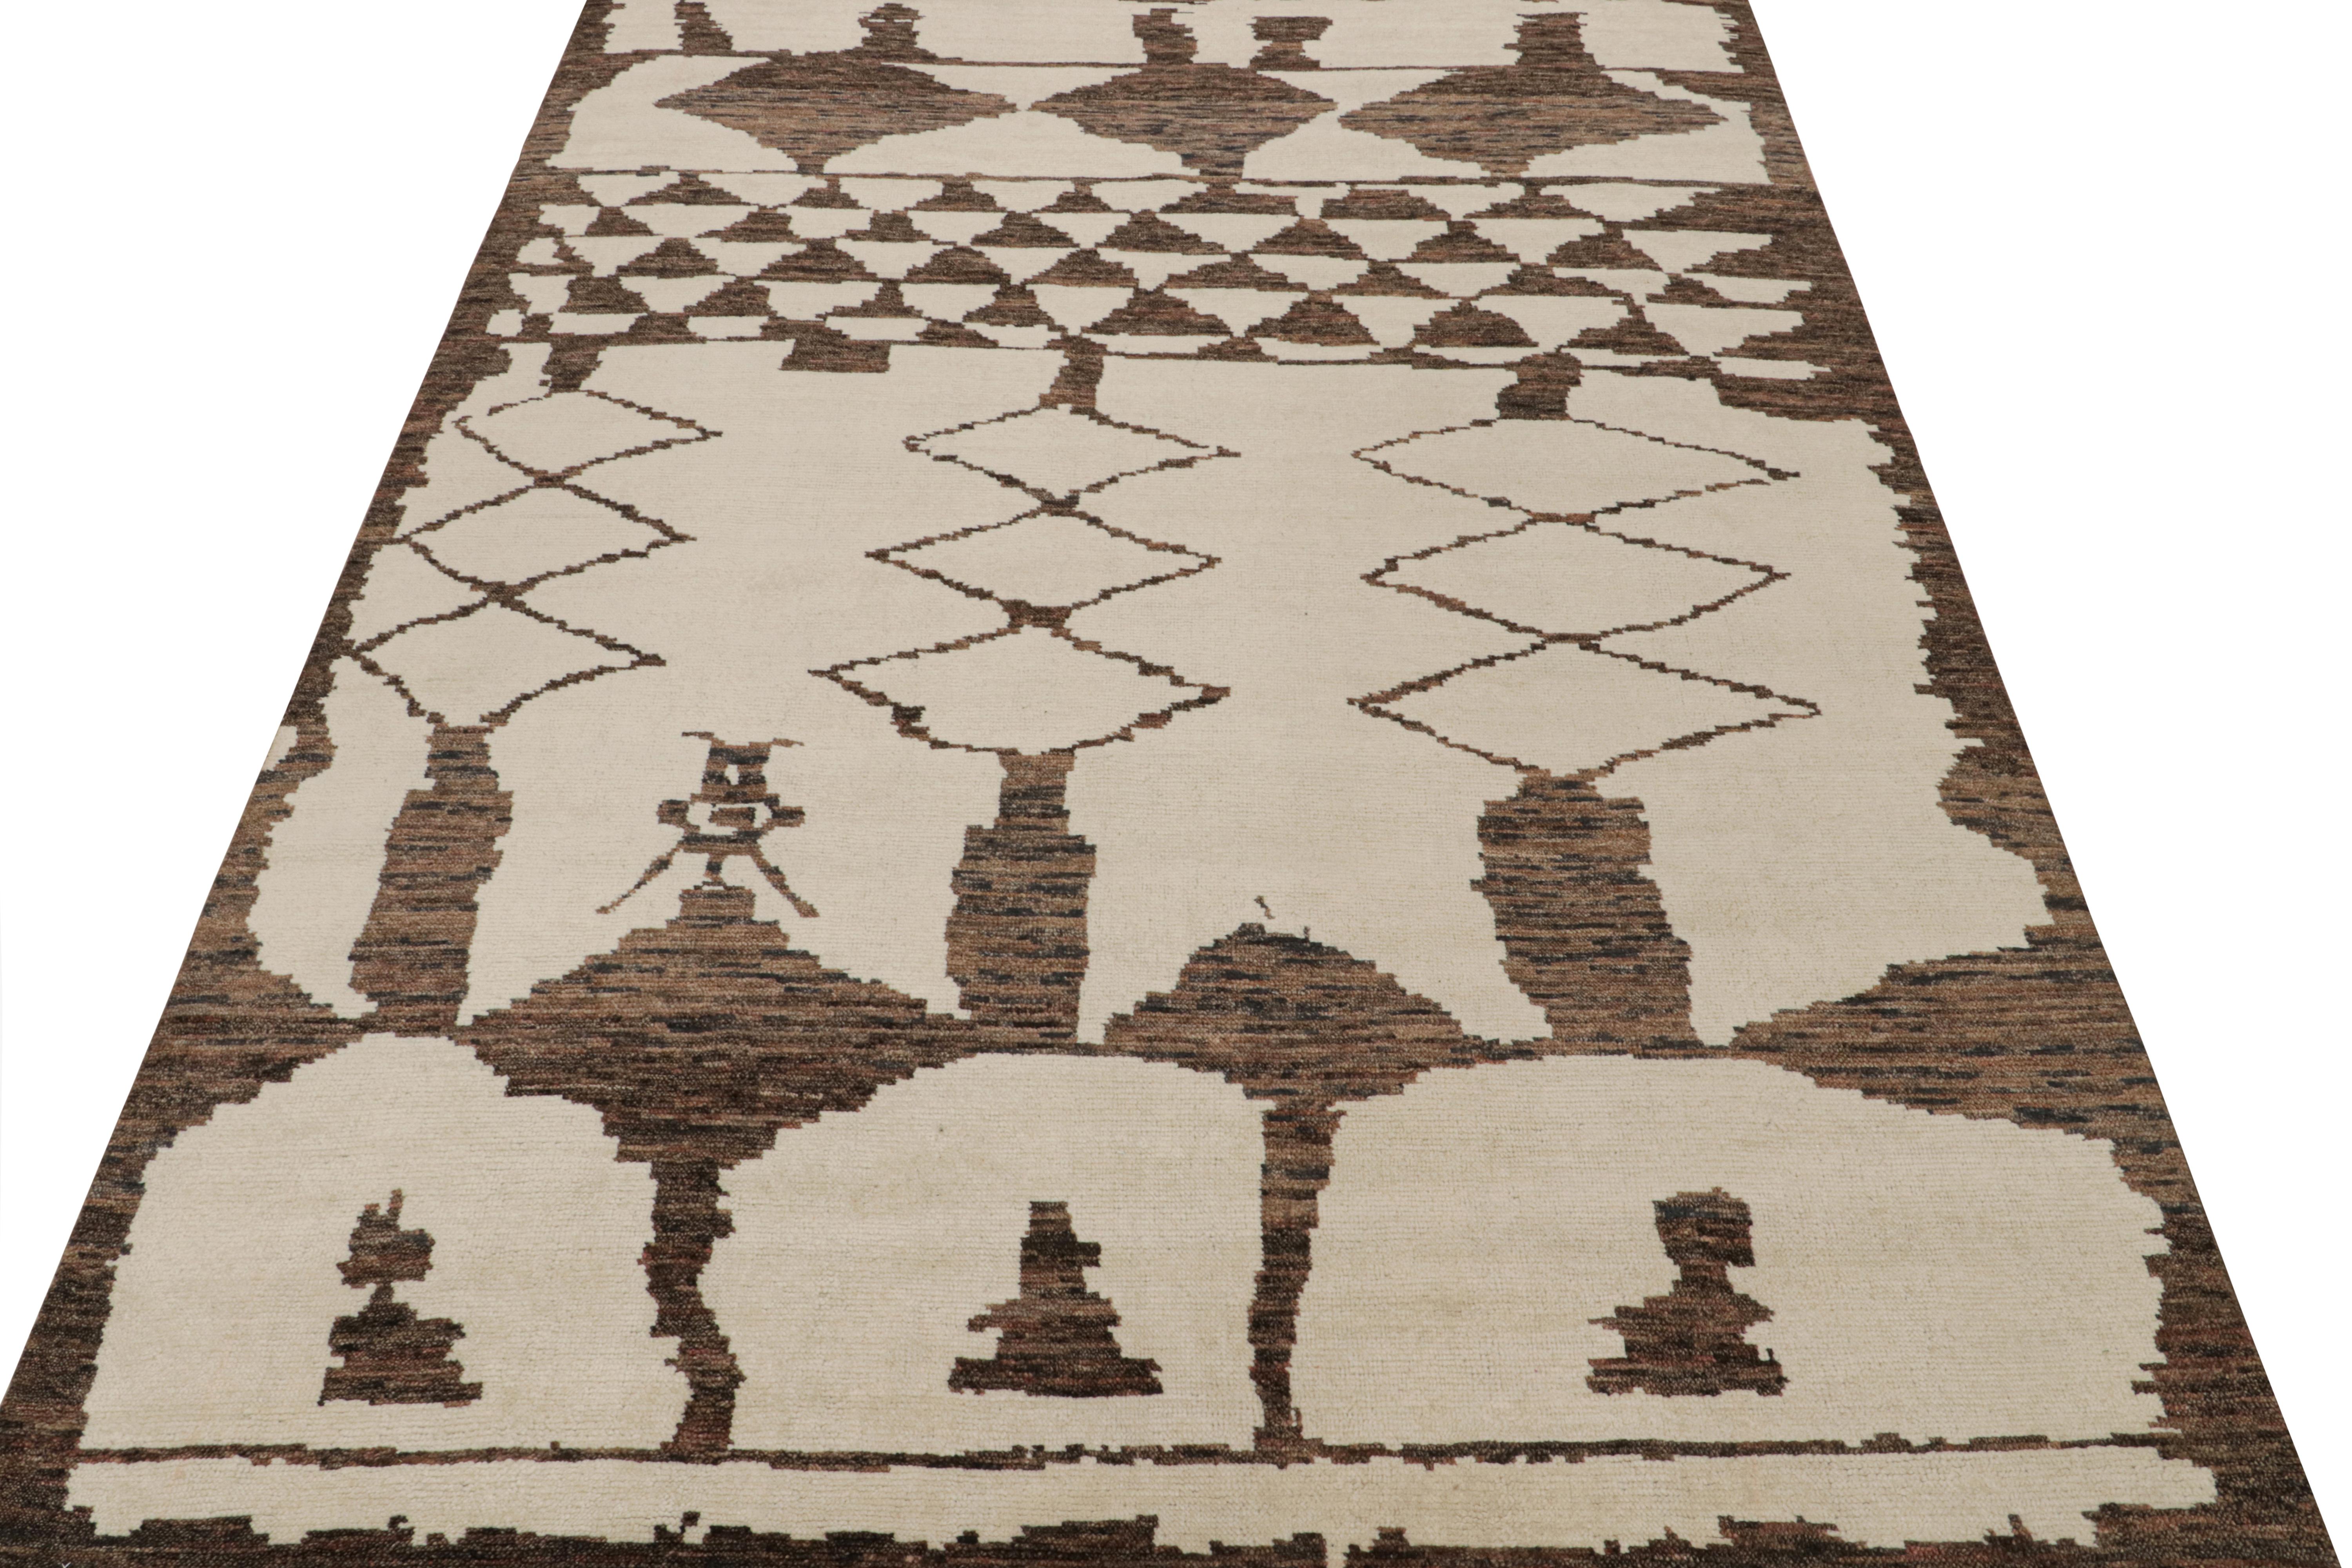 Tribal Rug & Kilim’s Moroccan Style Rug in Beige and Brown Geometric Patterns For Sale